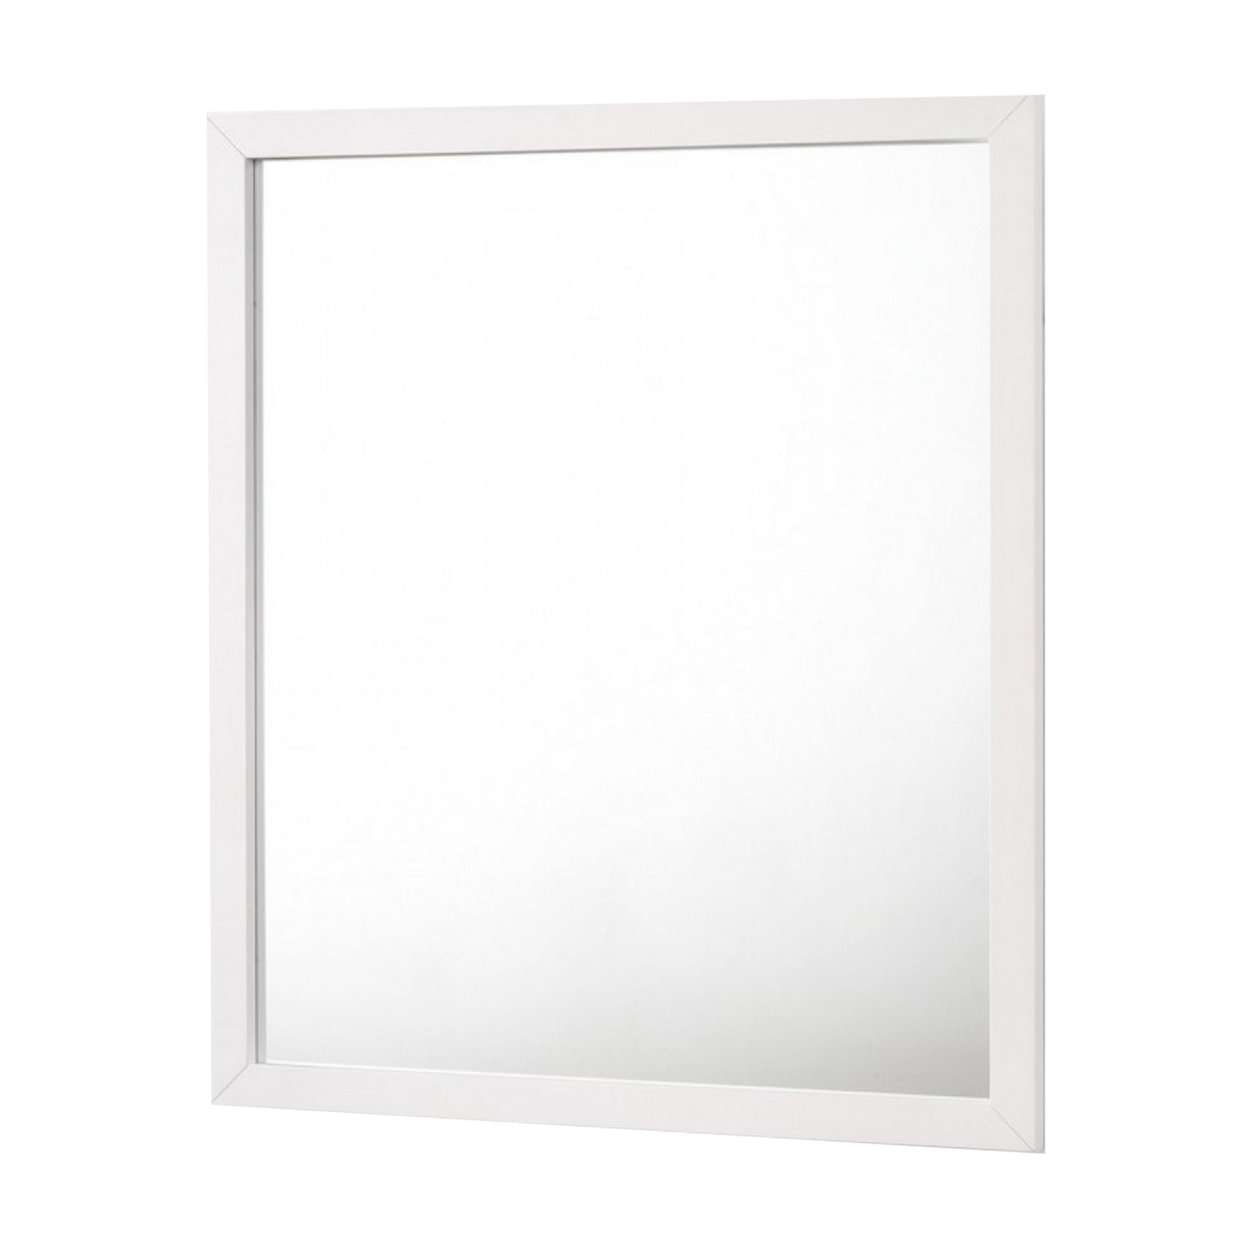 Wall Mirror With Rectangle Frame And Natural Wood Grain Details, White- Saltoro Sherpi